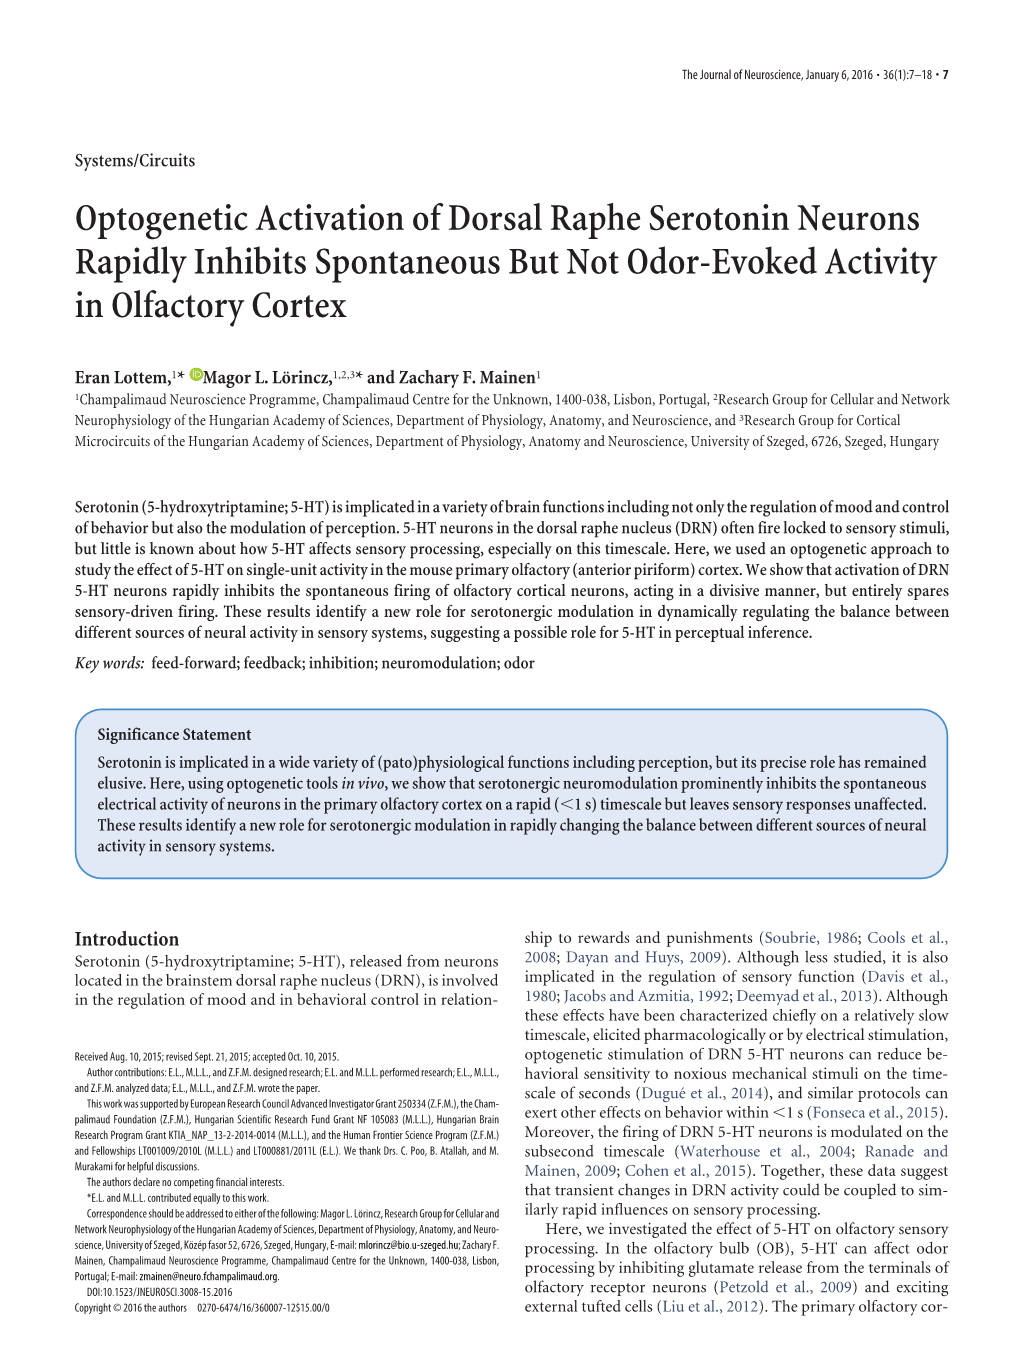 Optogenetic Activation of Dorsal Raphe Serotonin Neurons Rapidly Inhibits Spontaneous but Not Odor-Evoked Activity in Olfactory Cortex